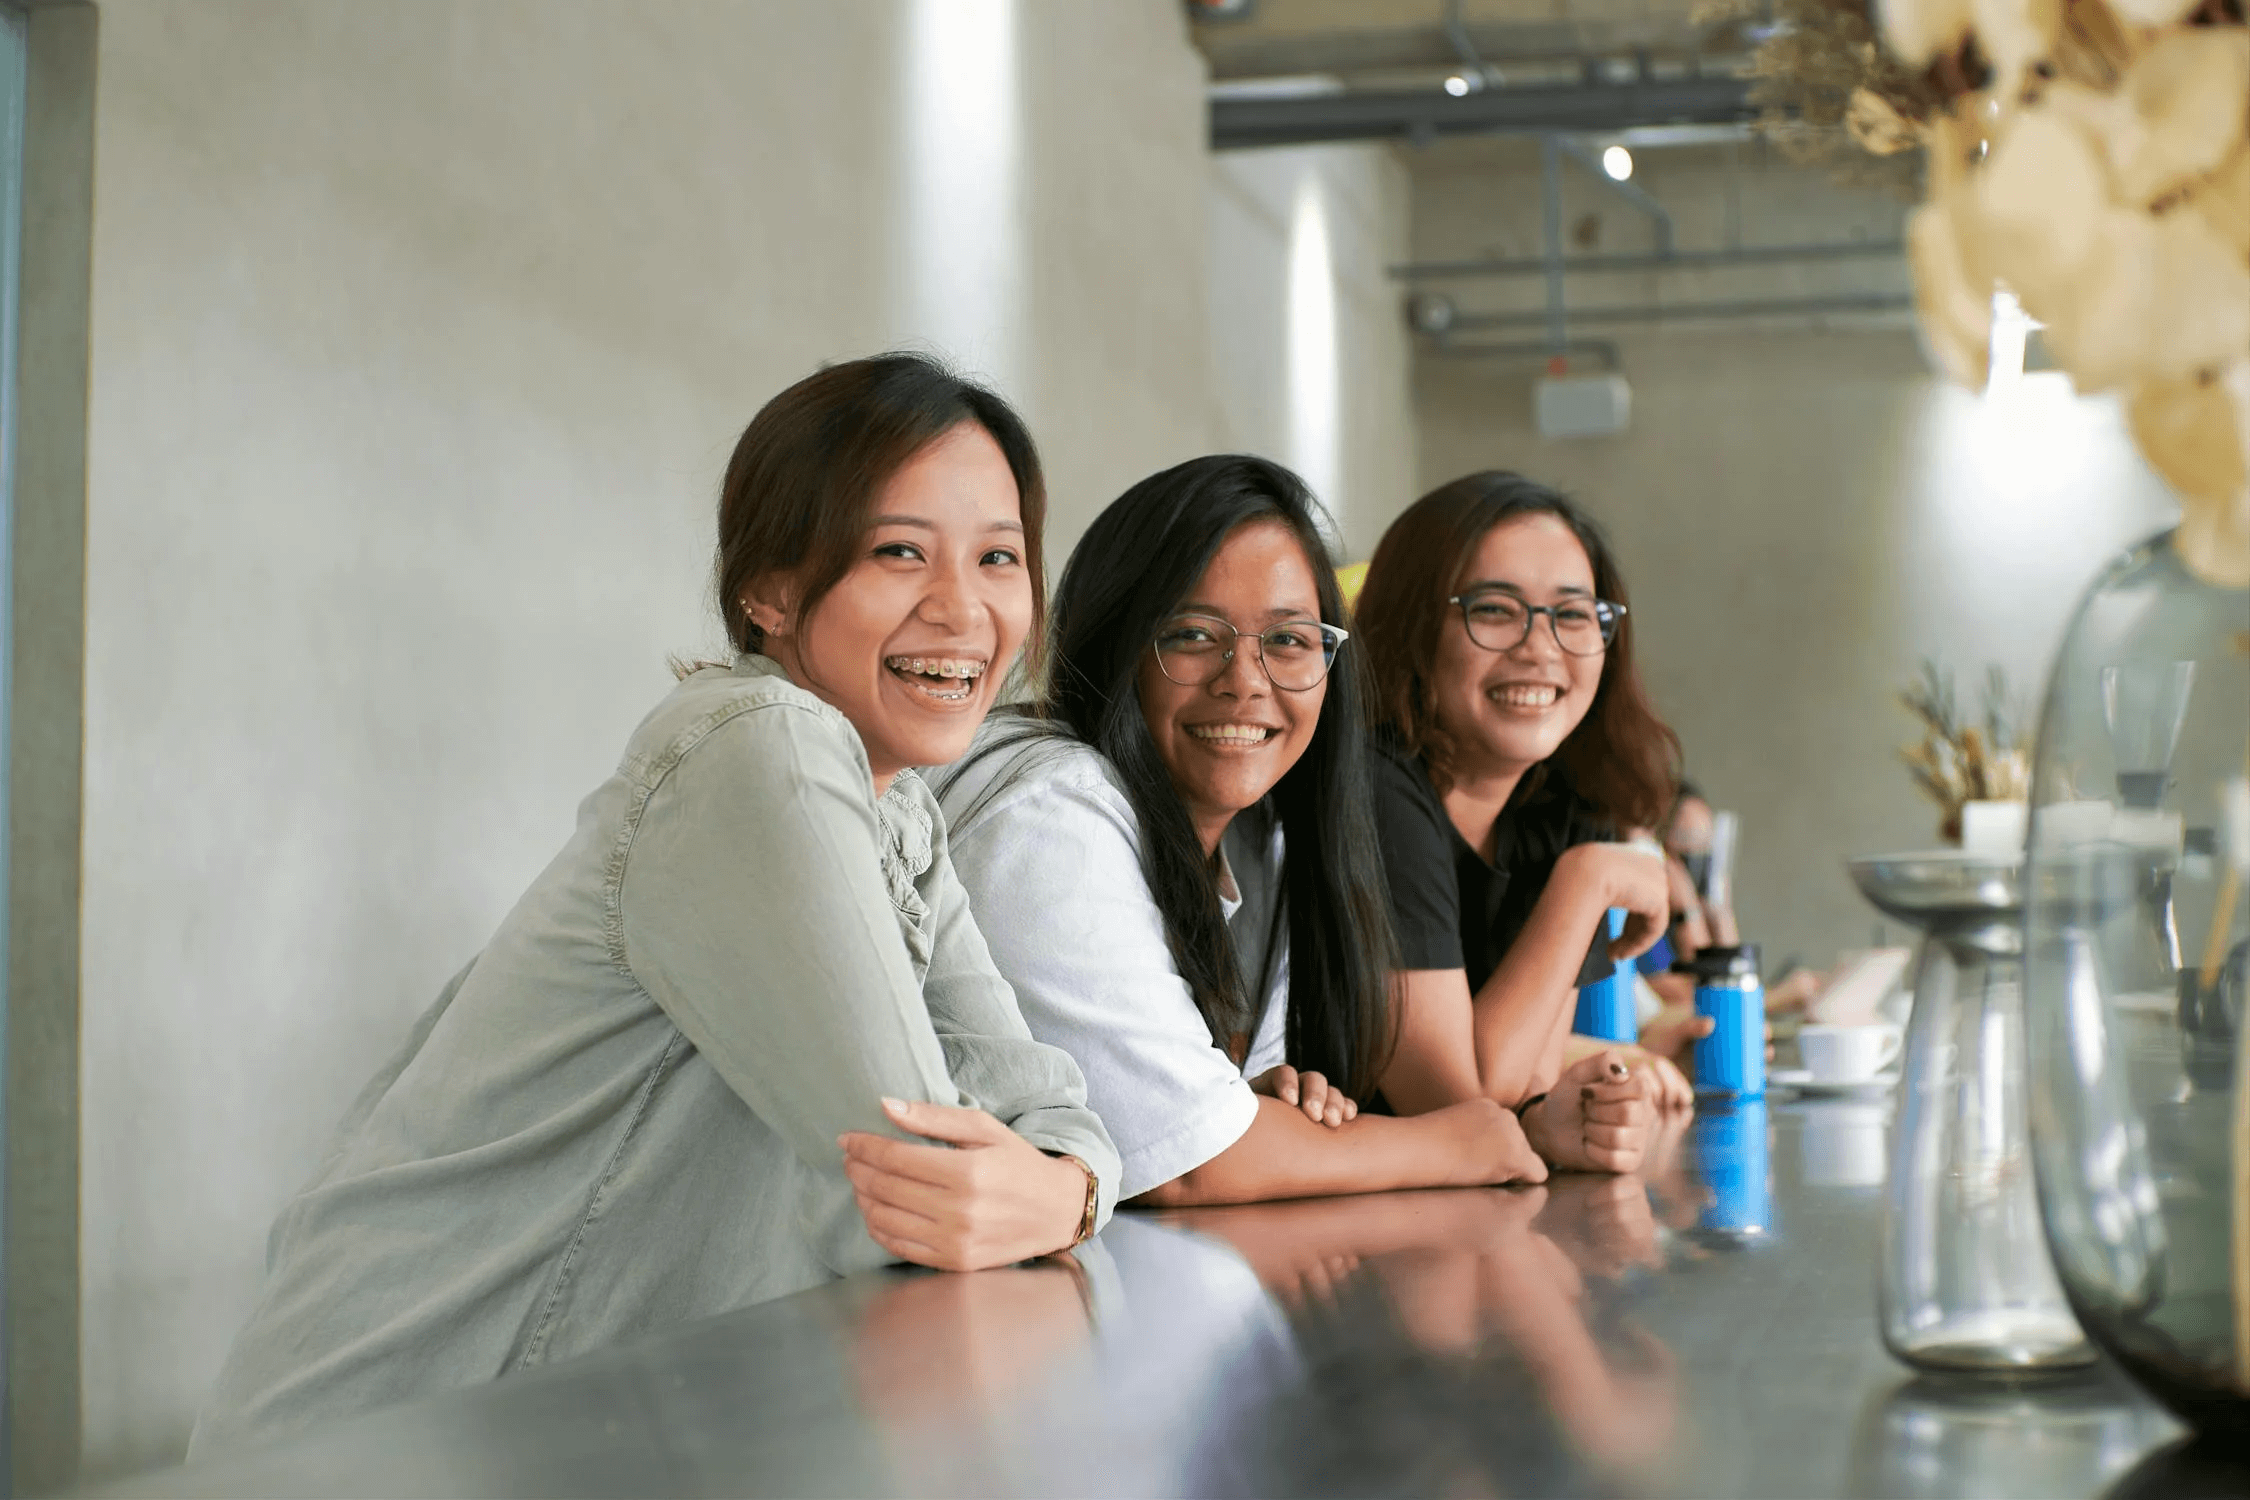 A diverse ground of three Asian women, sitting at a table and smiling at the camera.